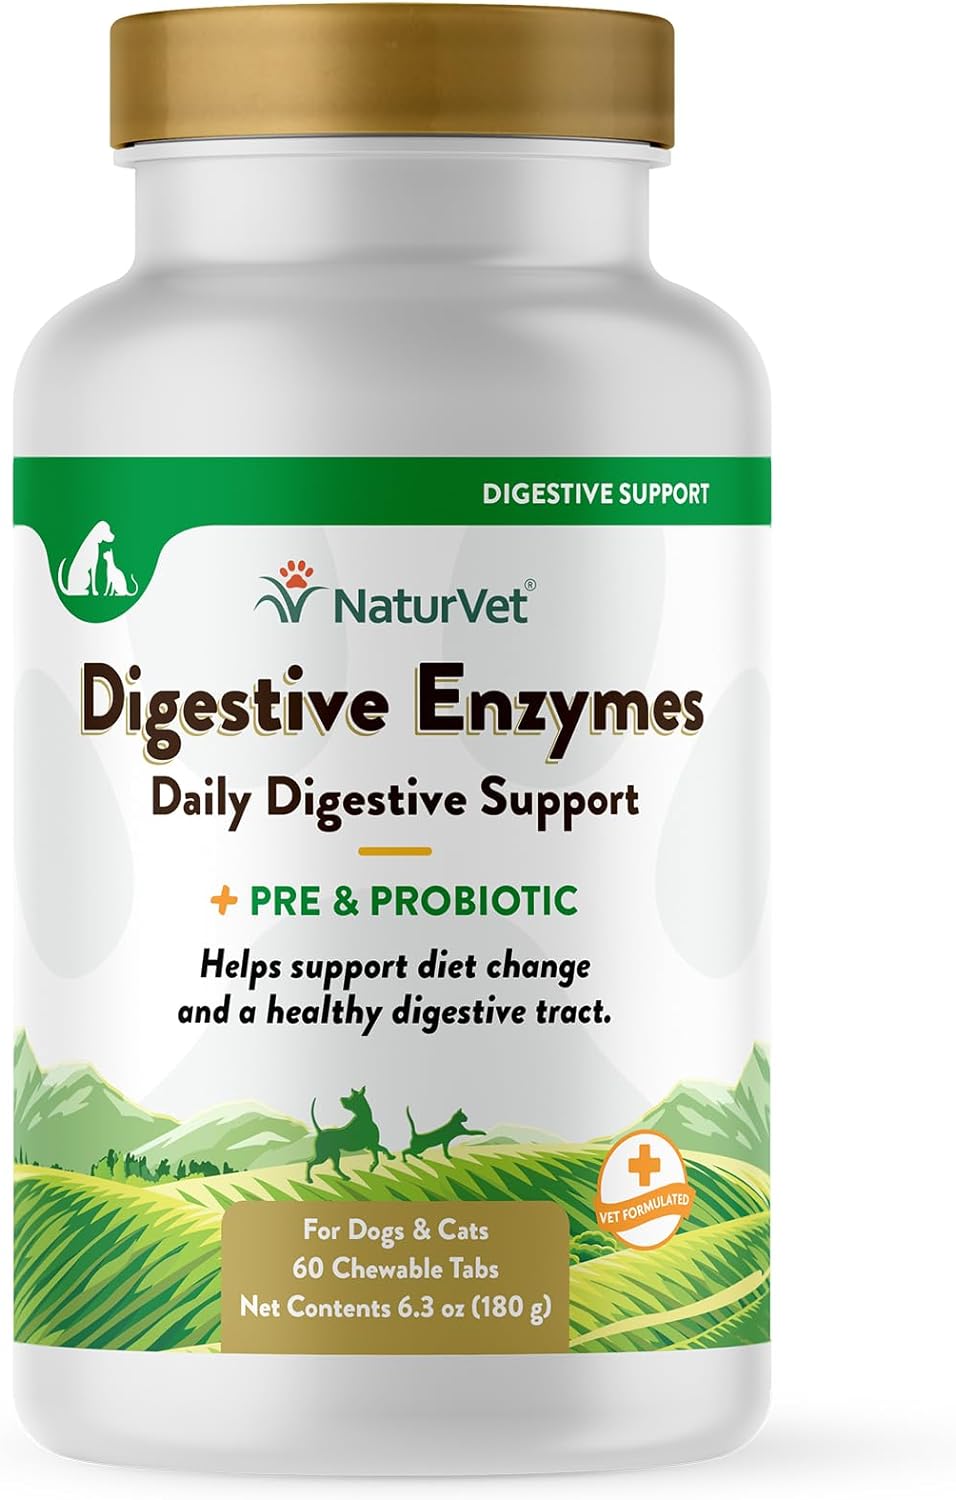 NaturVet – Digestive Enzymes - Plus Probiotics & Prebiotics – Helps Support Diet Change & A Healthy Digestive Tract – for Dogs & Cats (Chewable Tablets, 60 Count)